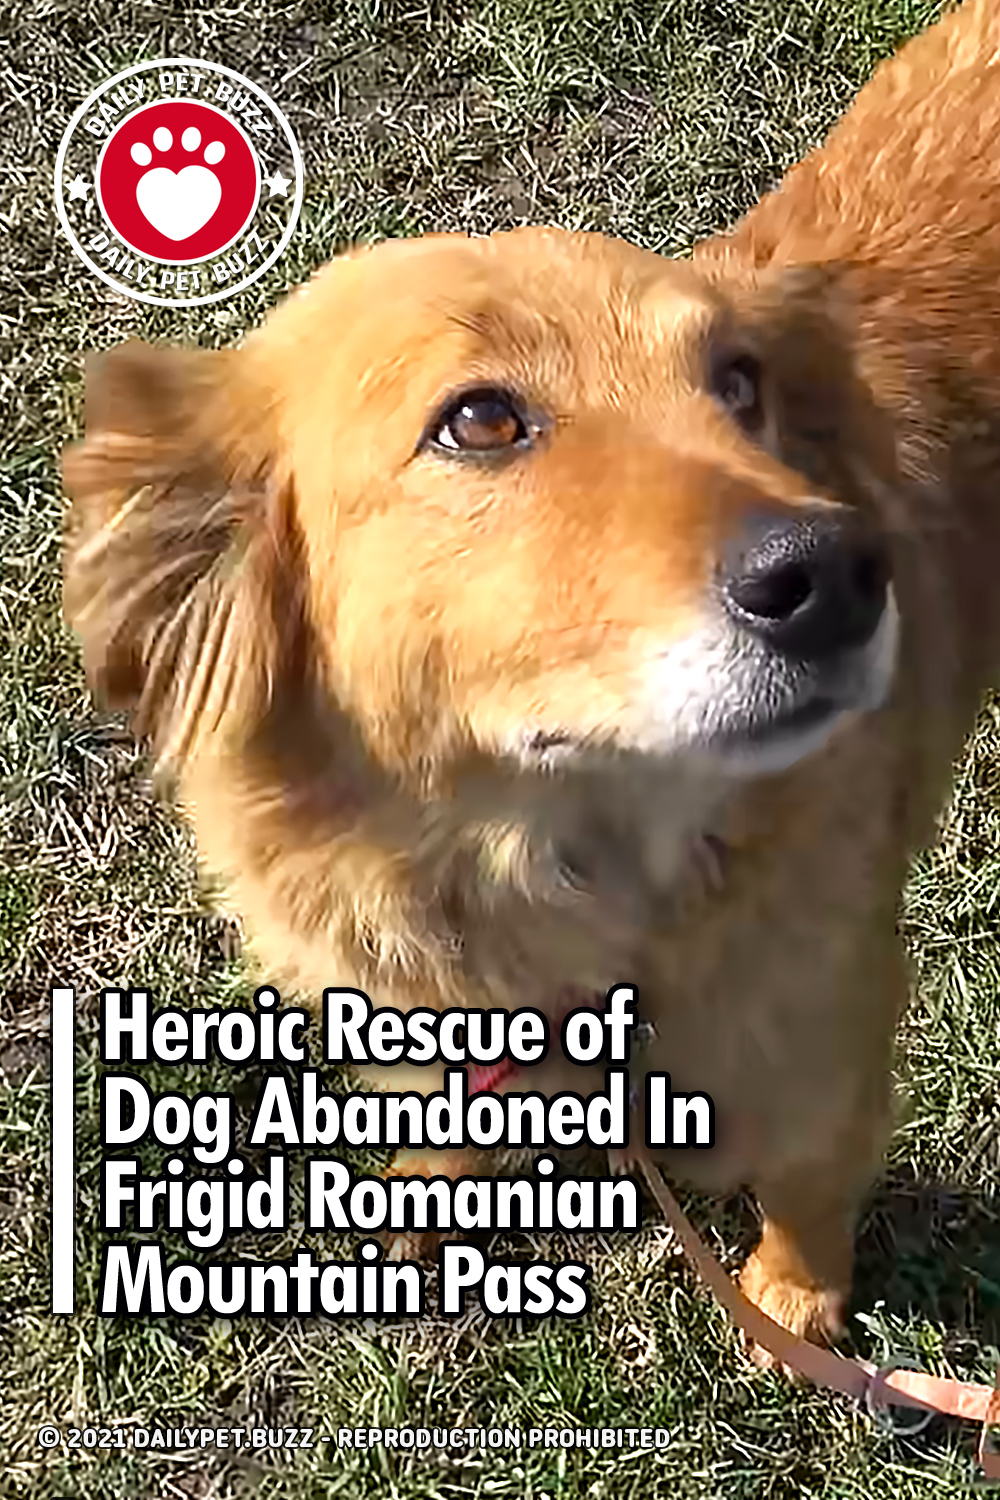 Heroic Rescue of Dog Abandoned In Frigid Romanian Mountain Pass